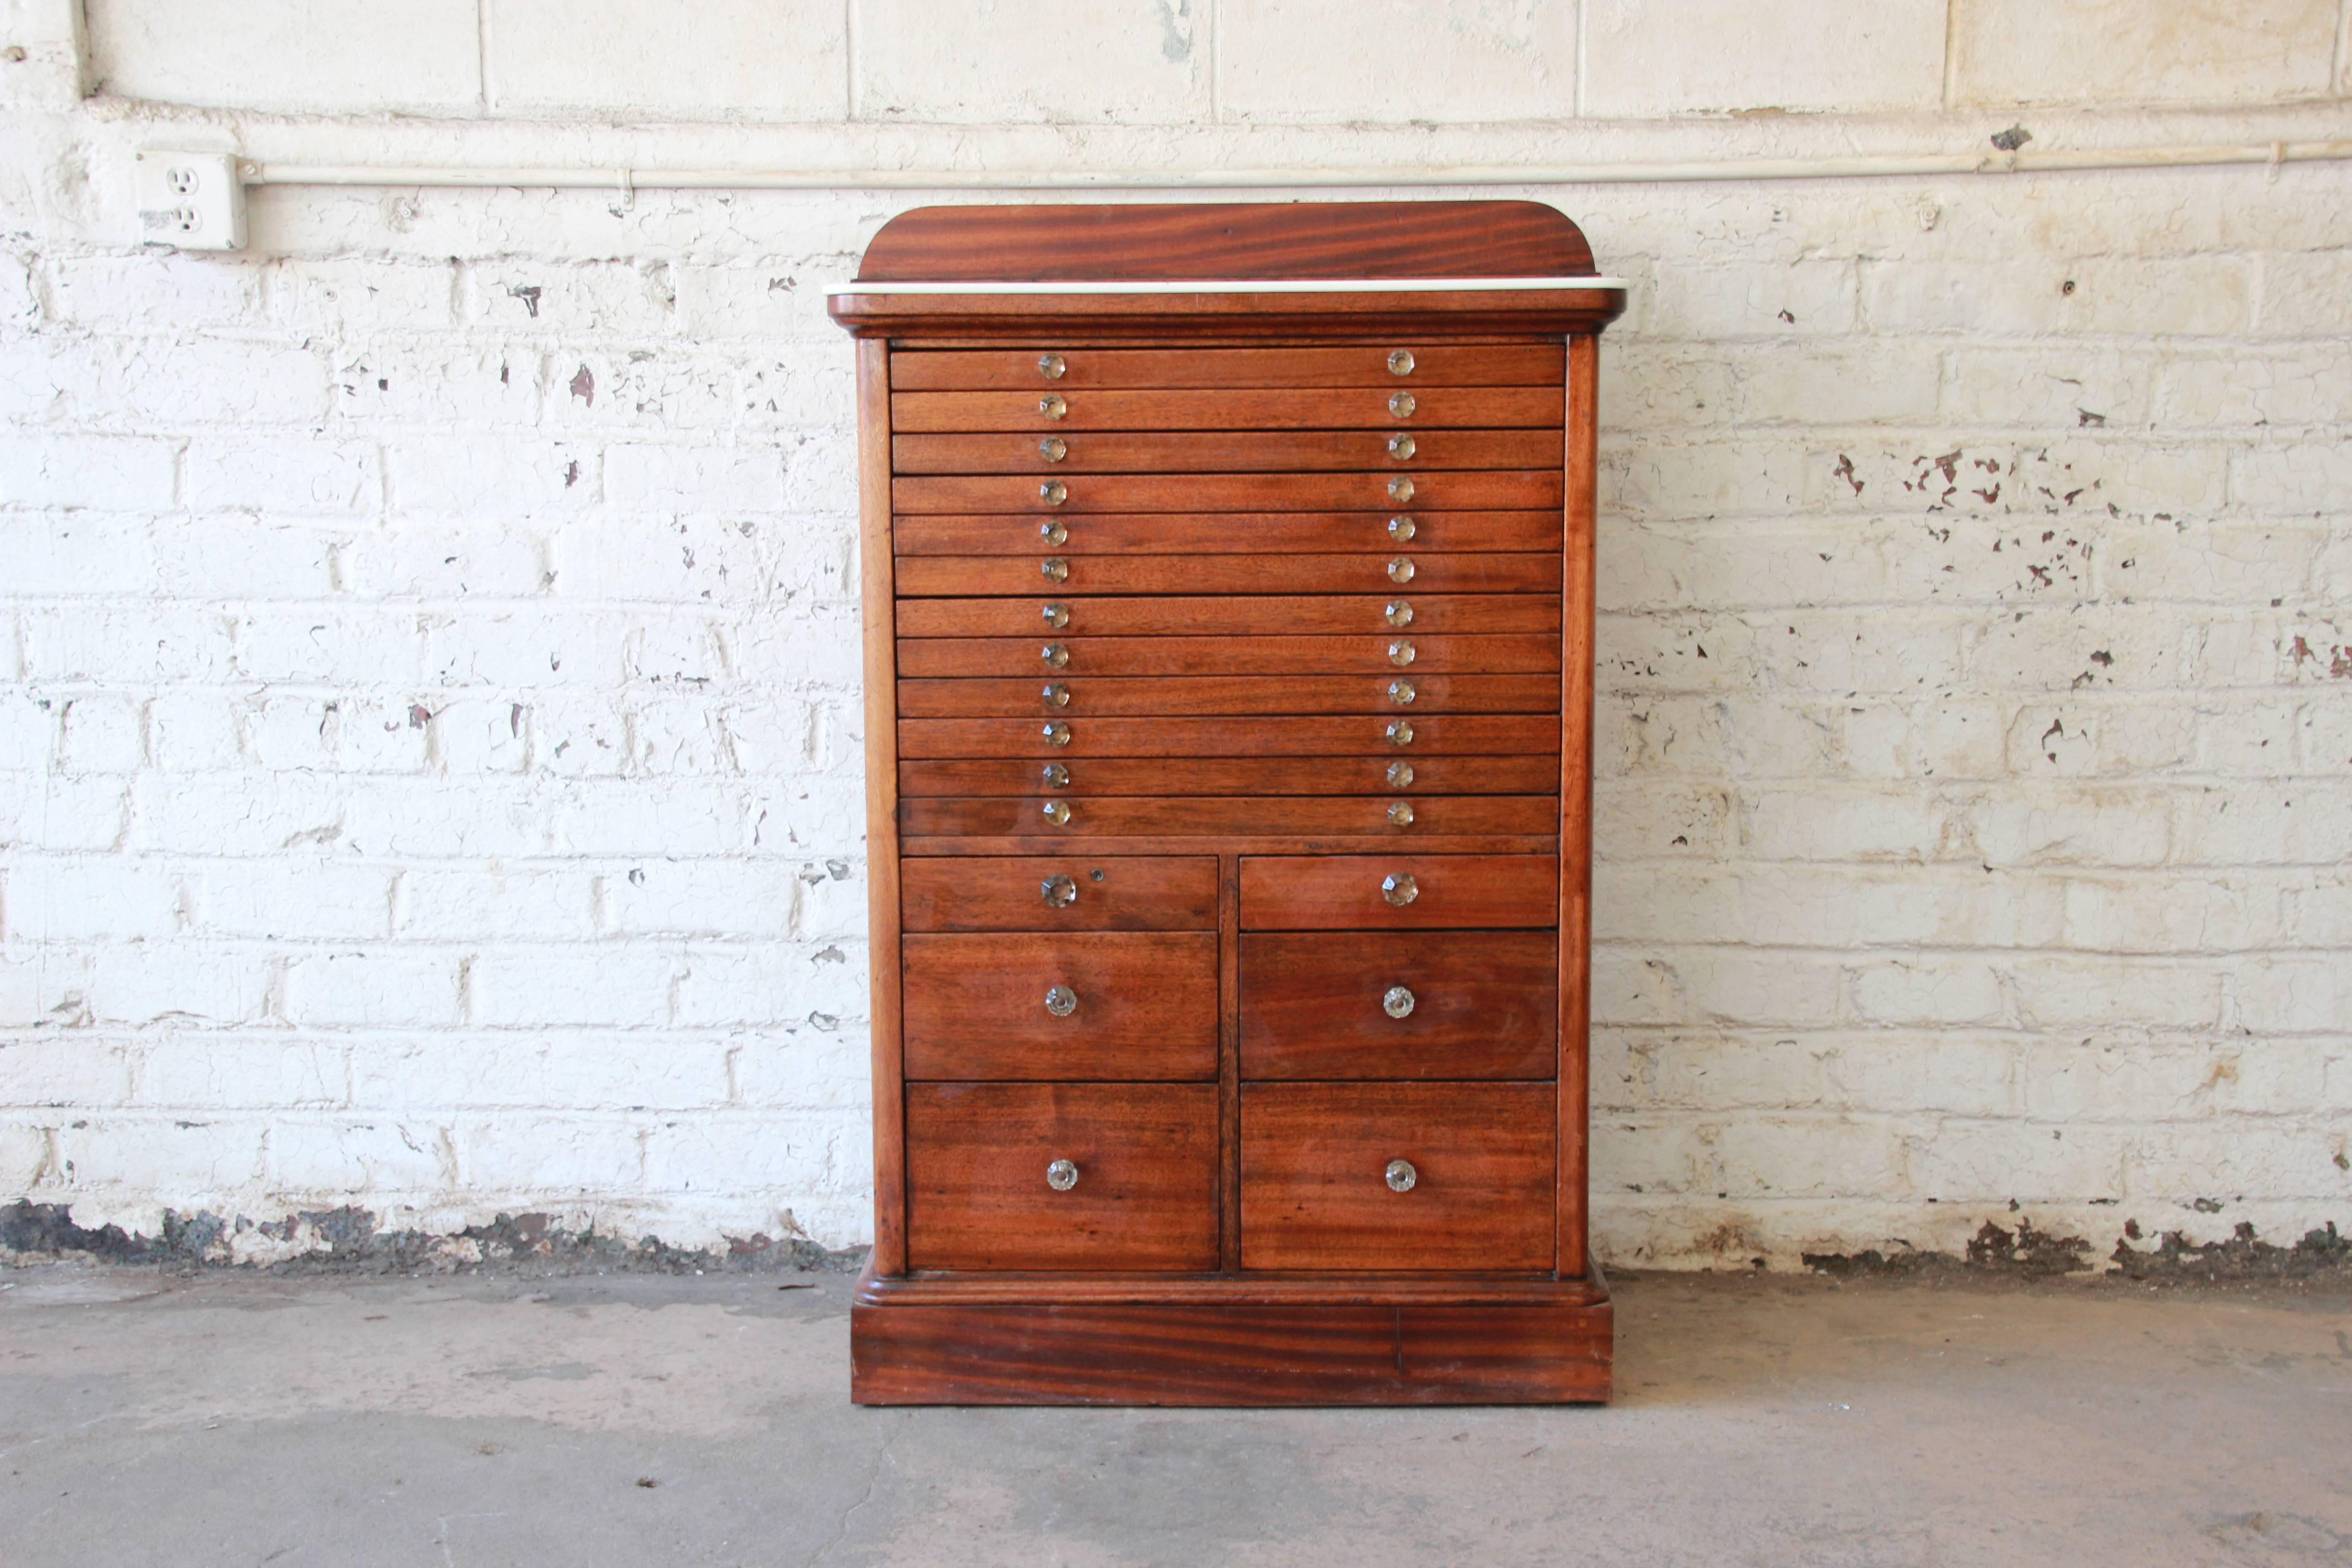 Offering a rare and unique antique mahogany dental cabinet. The cabinet features sixteen graduated drawers, with glass drawer pulls and metal interiors. It has a nice milk glass top and a backsplash. Considering age and use, the cabinet is in very